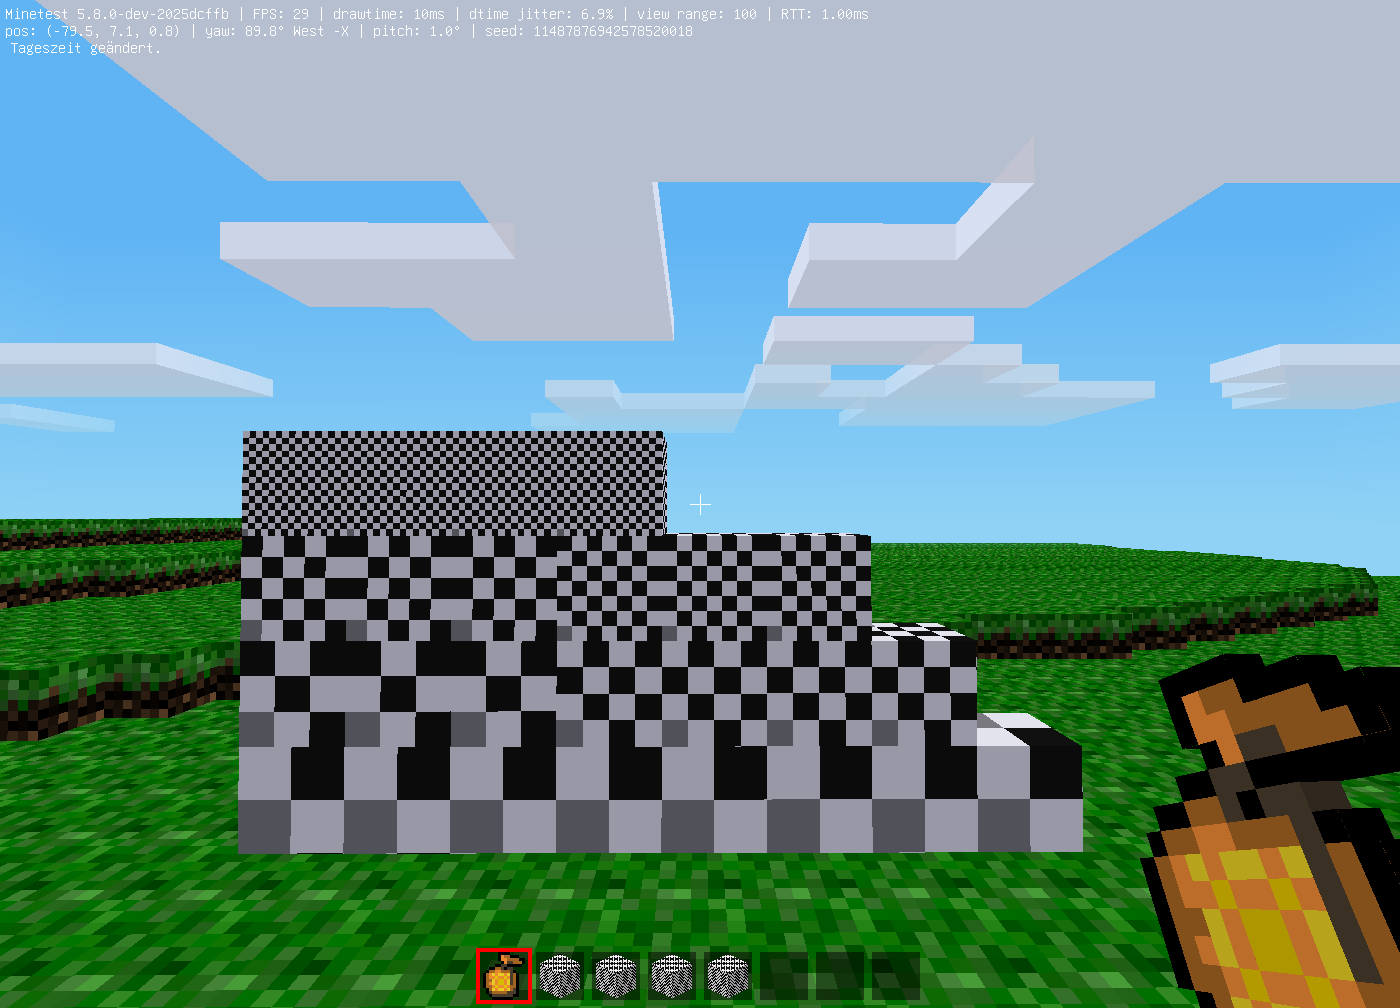 A wall of checkerboard test nodes with different tilings.